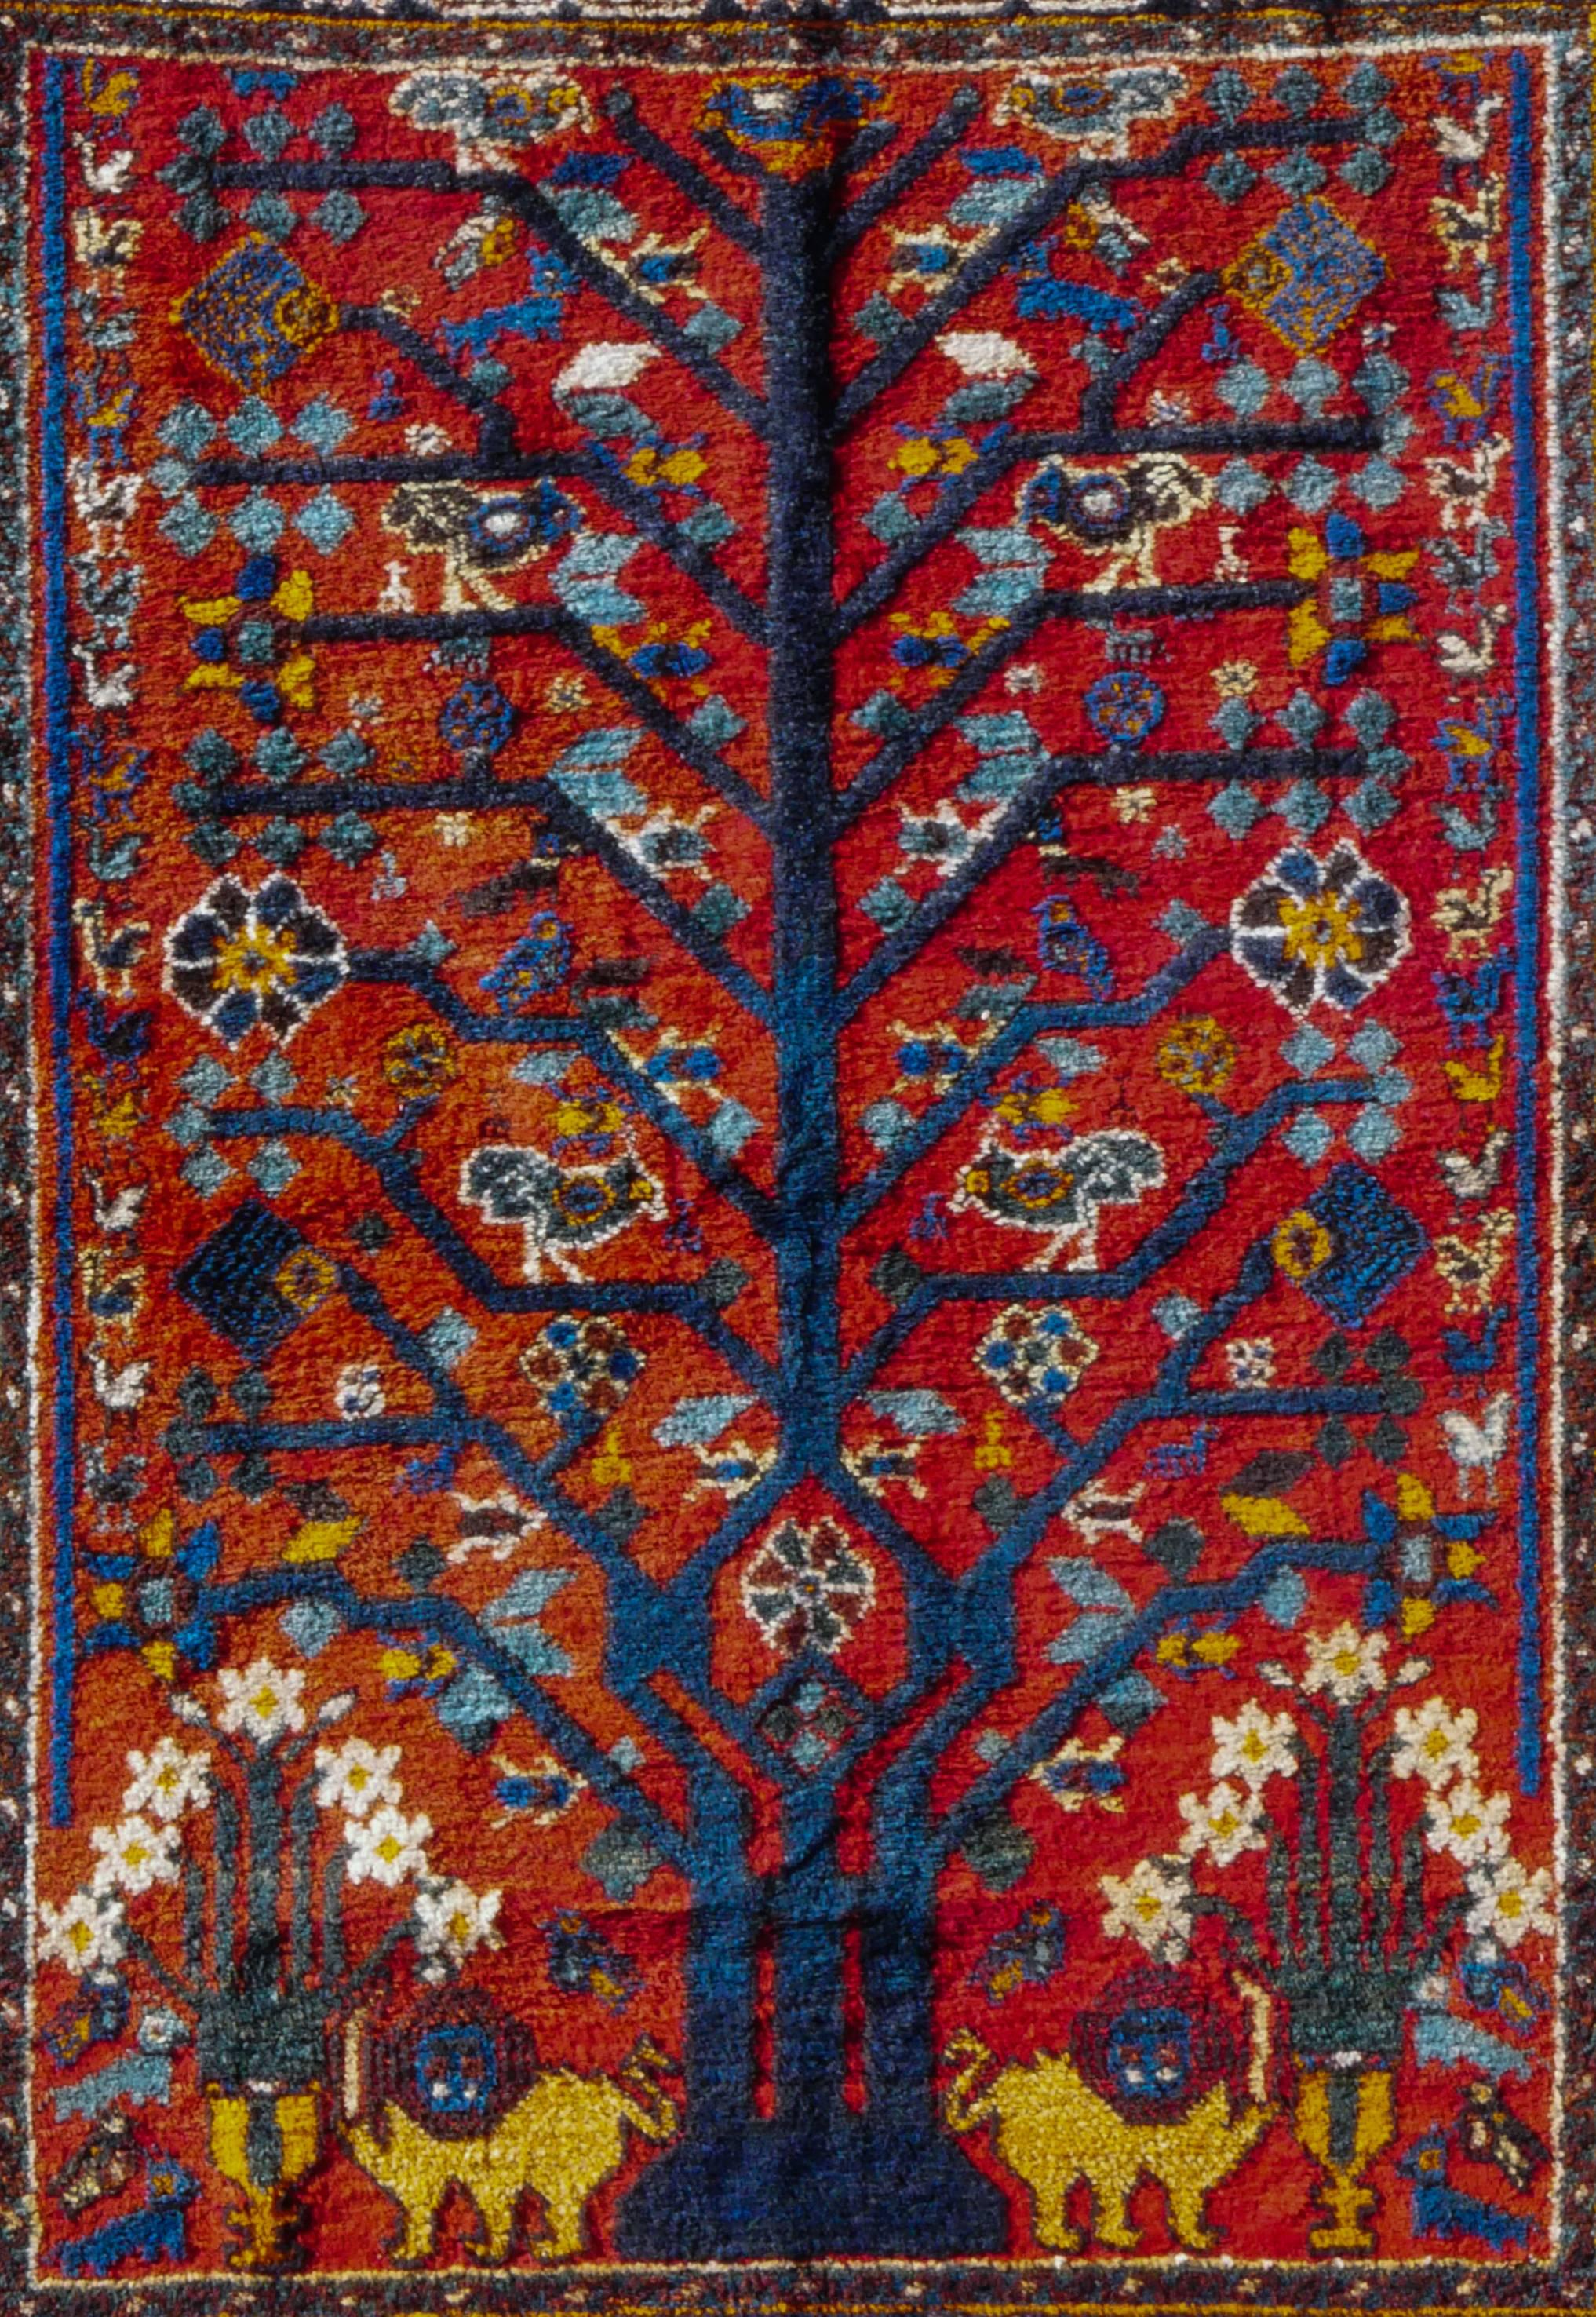 This is a nomadic masterpiece; a rare Tree of Life Neyriz gabbeh. Neyriz is a small town in Fars province in southwest Iran. Neyriz weavers seem partial to Qashqai mythology and frequently draw on their motifs. 
This is a small-format carpet with